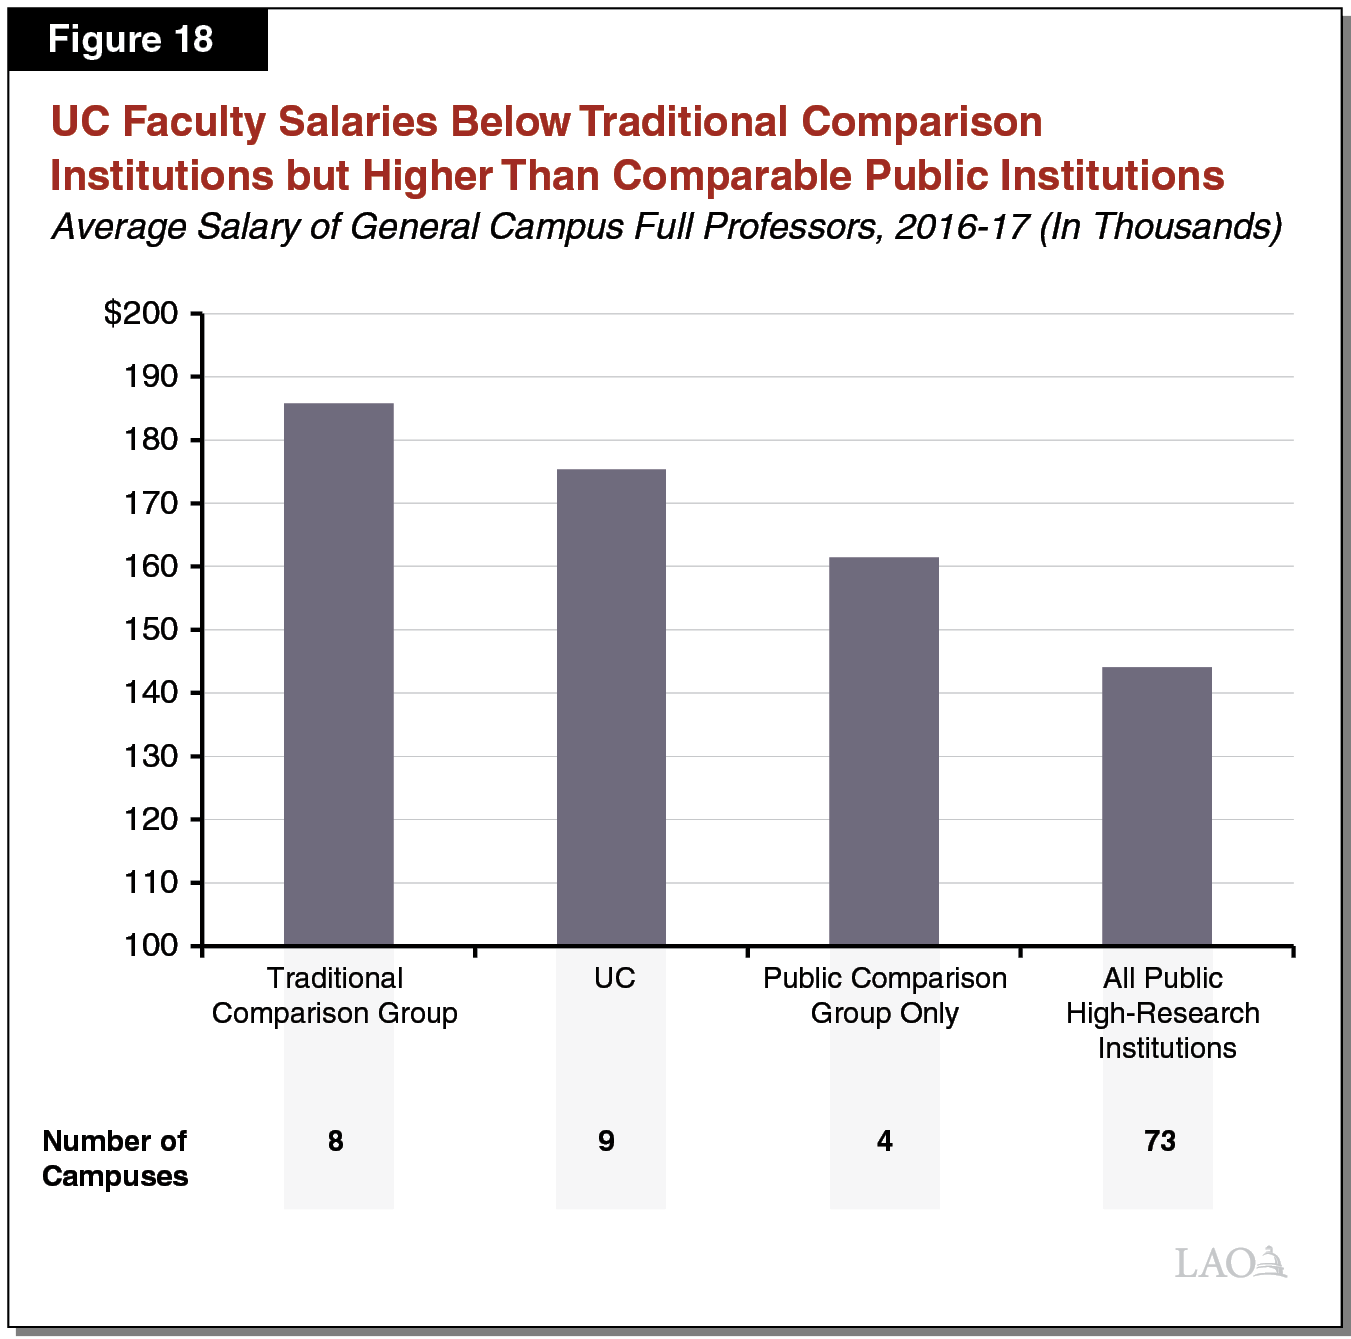 Figure 18 - UC Faculty Salaries Below Traditional Comparison Institutions but Higher Than Comparable Public Institutions